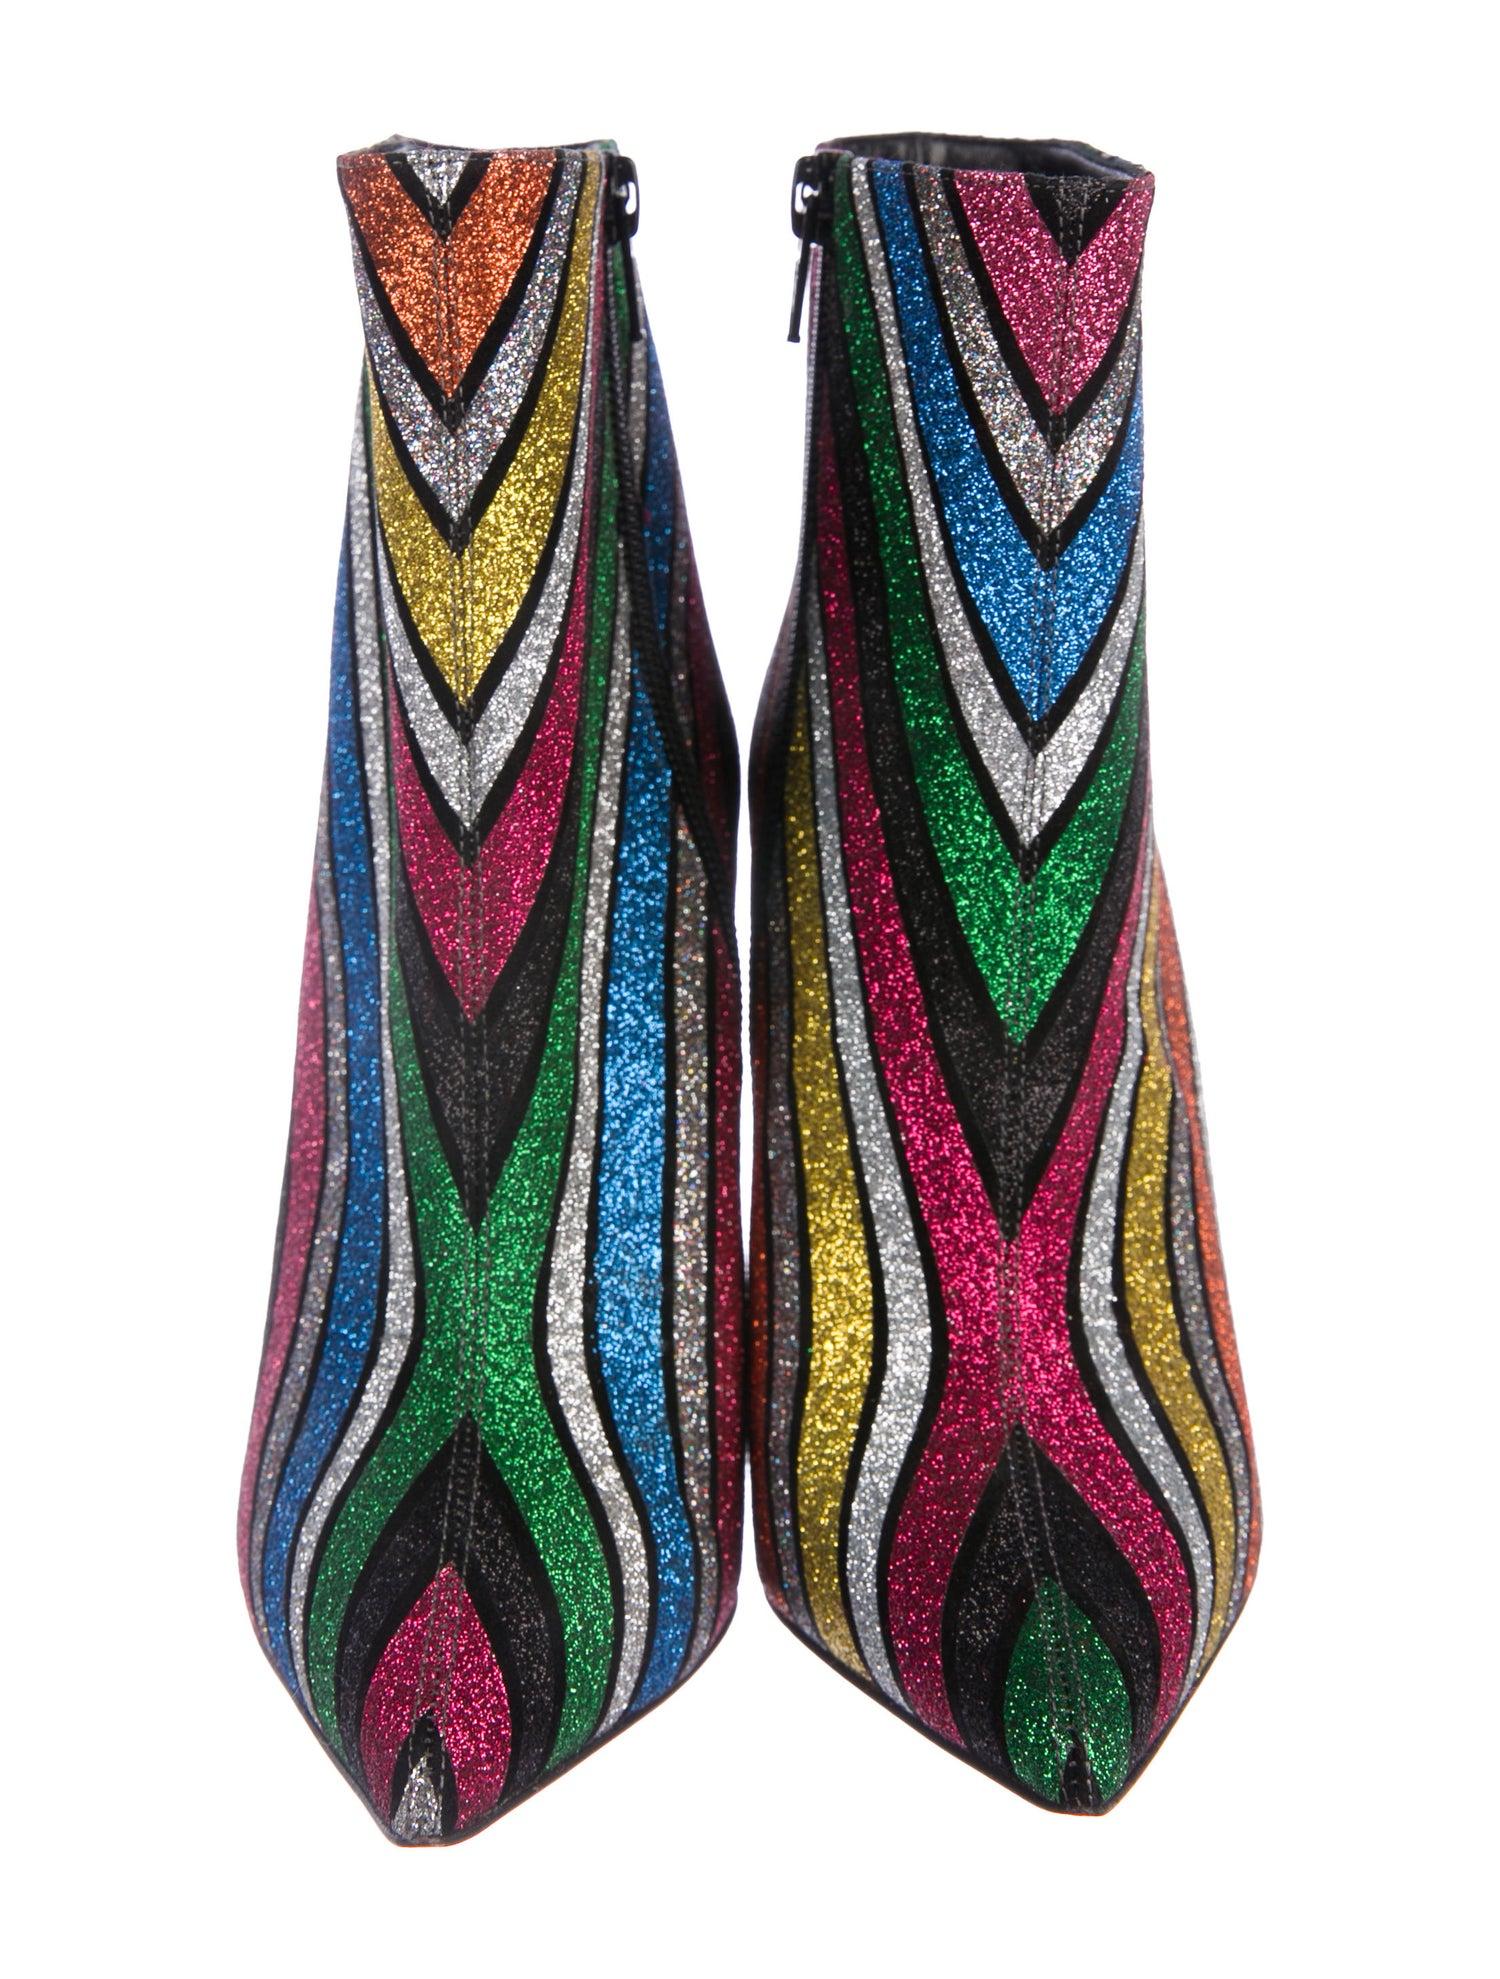 multi color booties